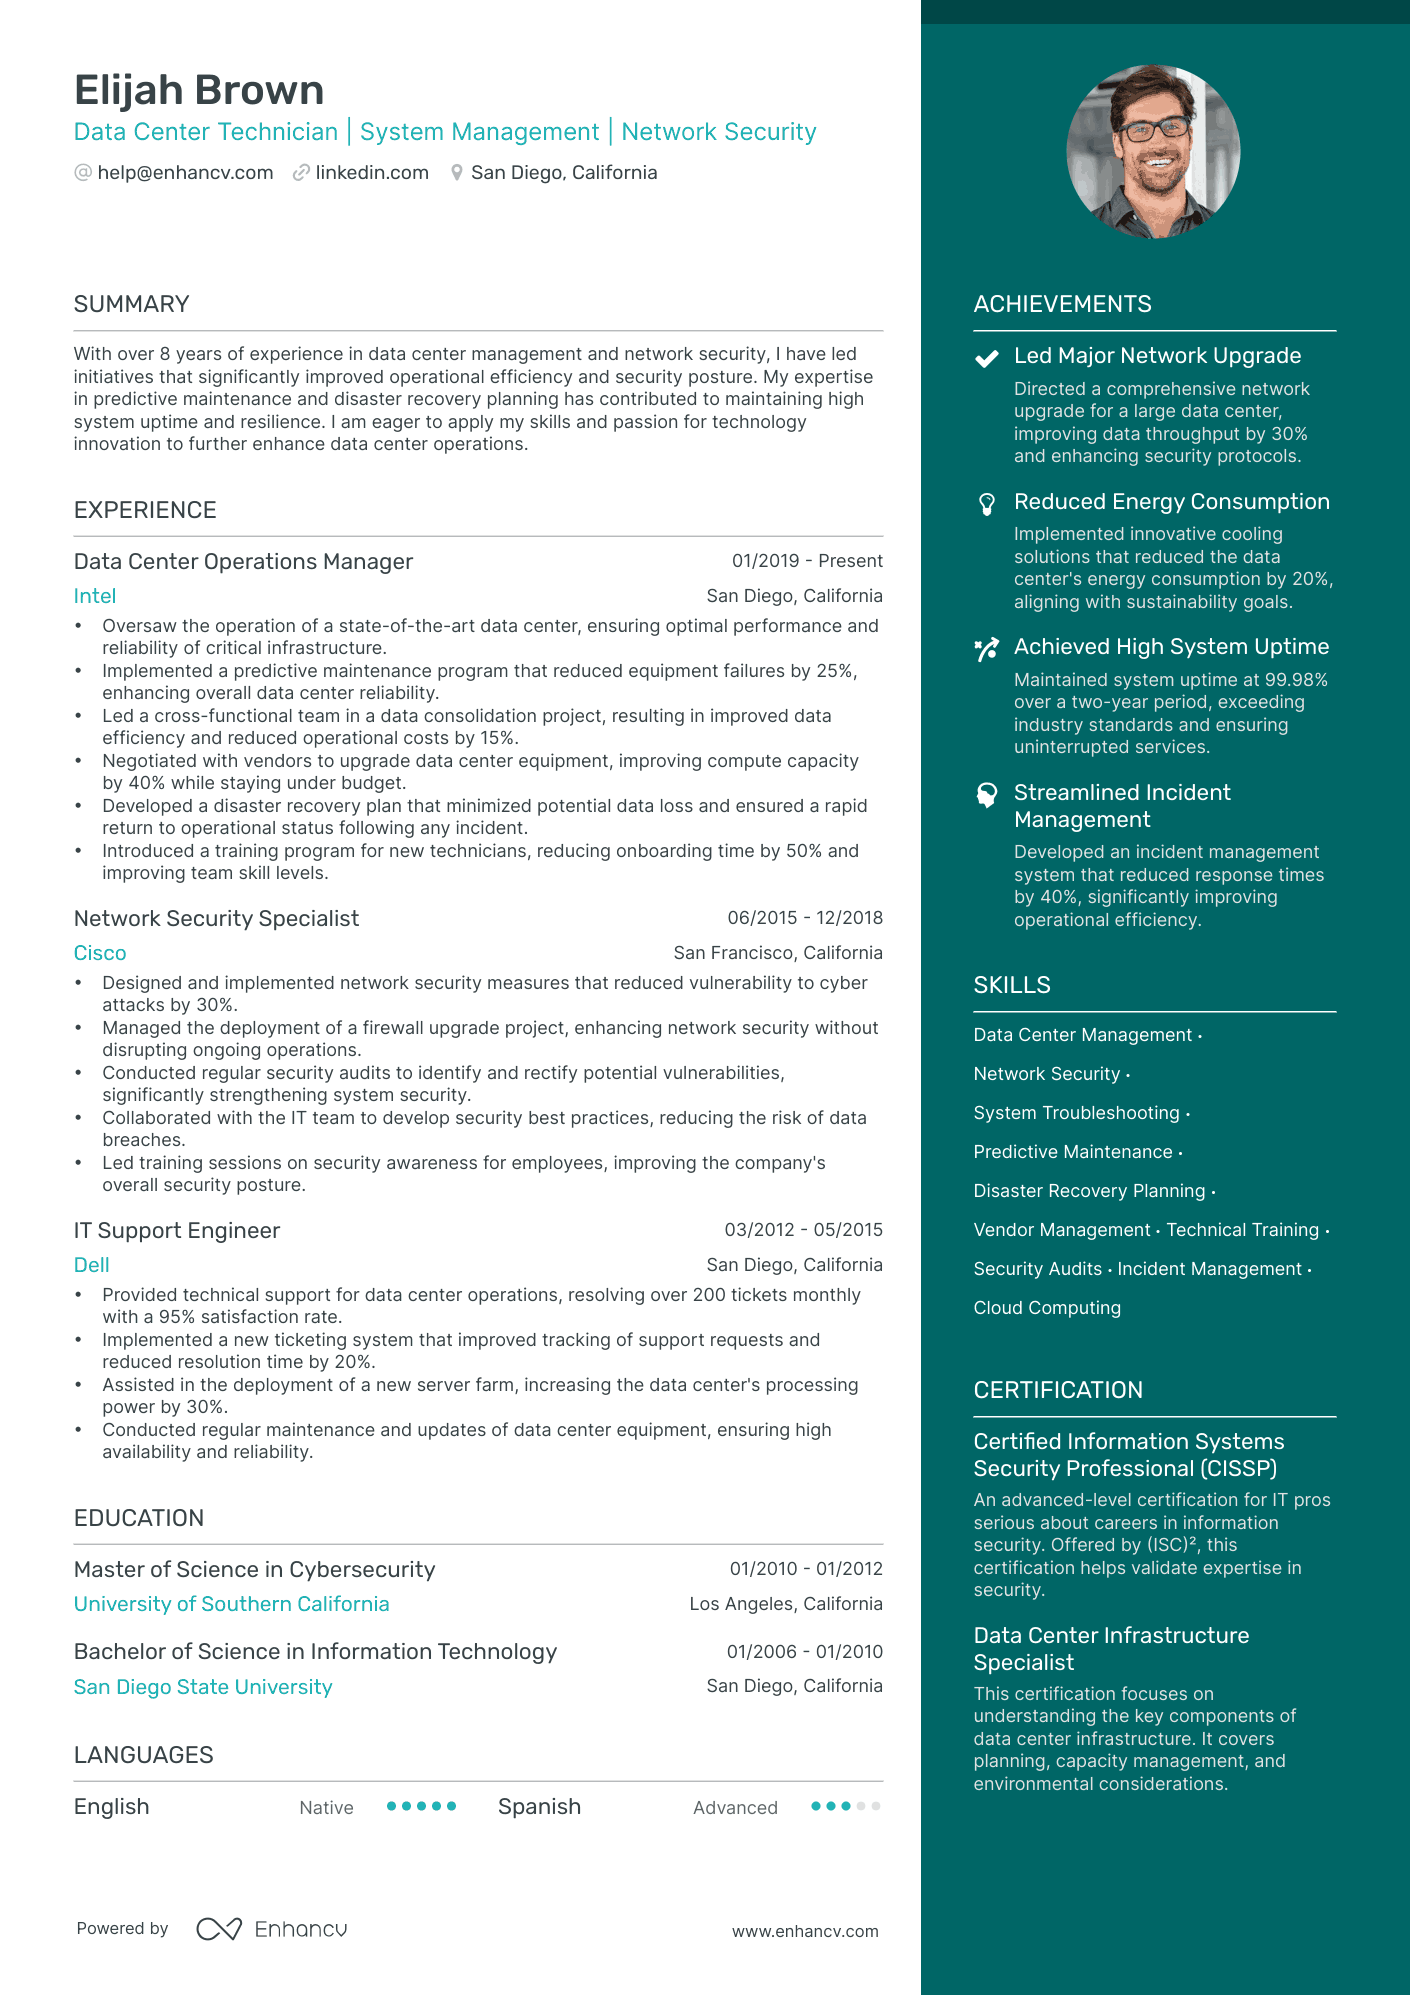 Data Center Technician | System Management | Network Security resume example